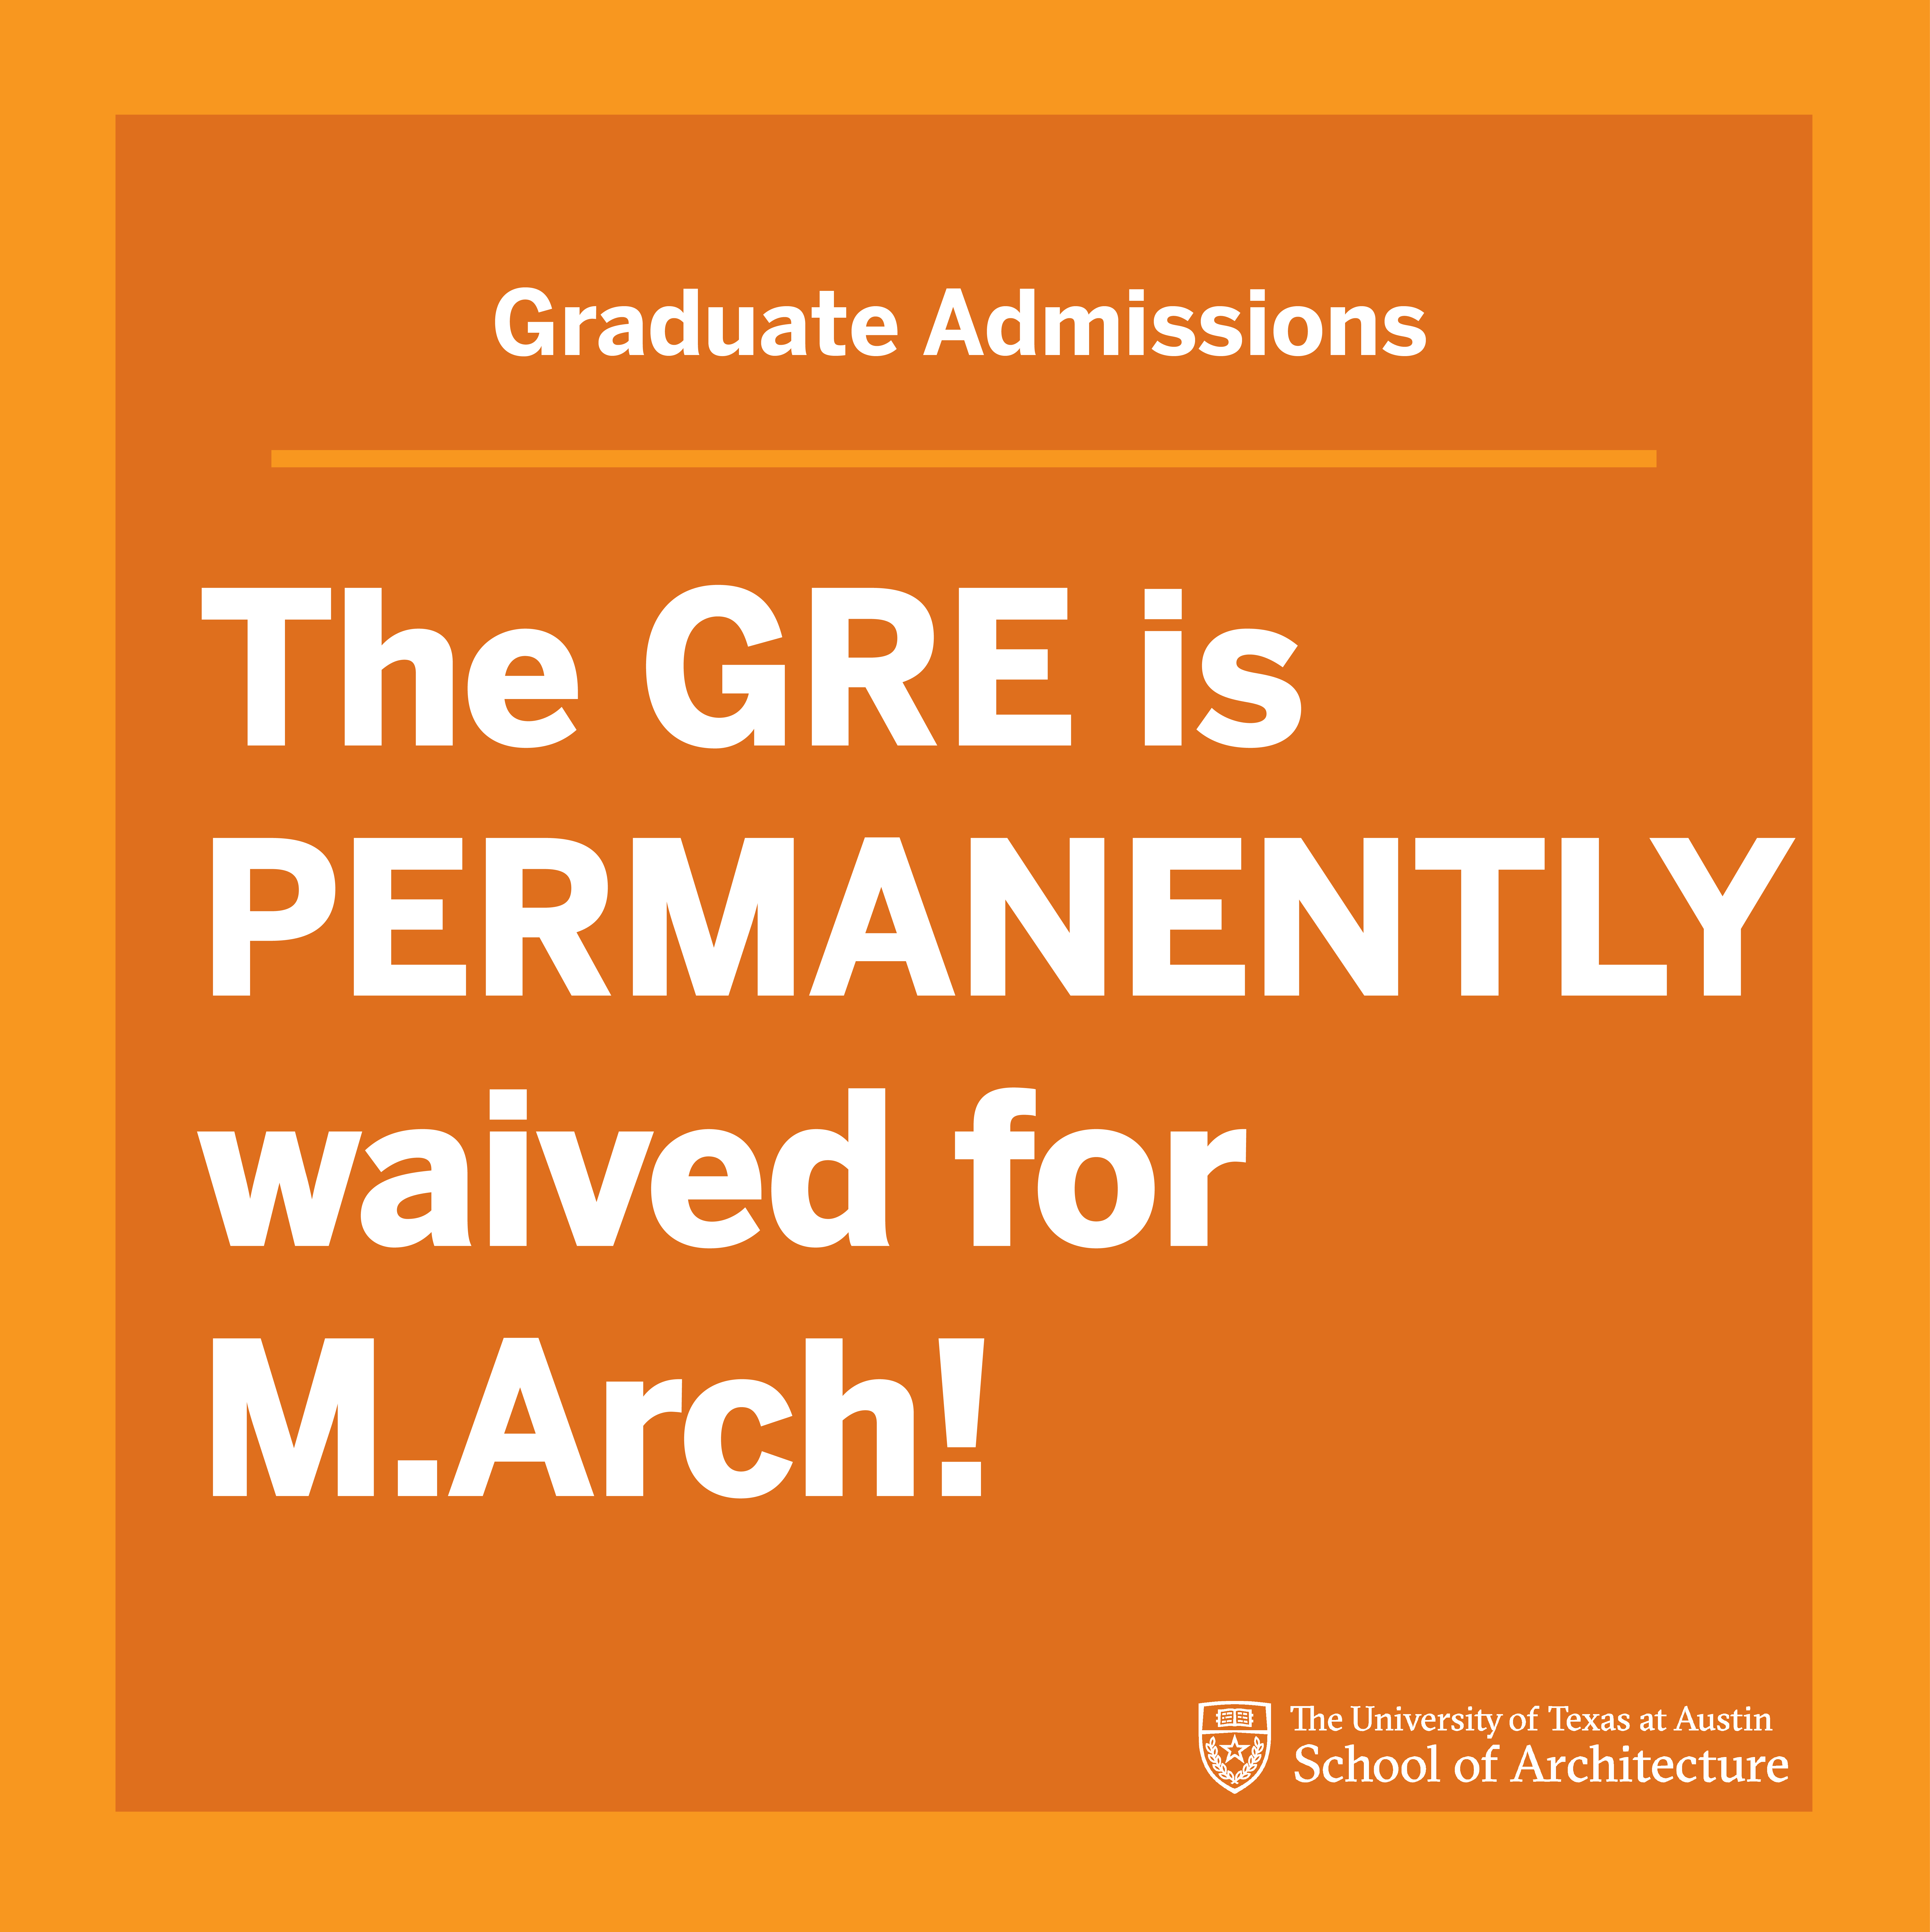 Burnt orange graphic notifying applicants that the GRE is waived